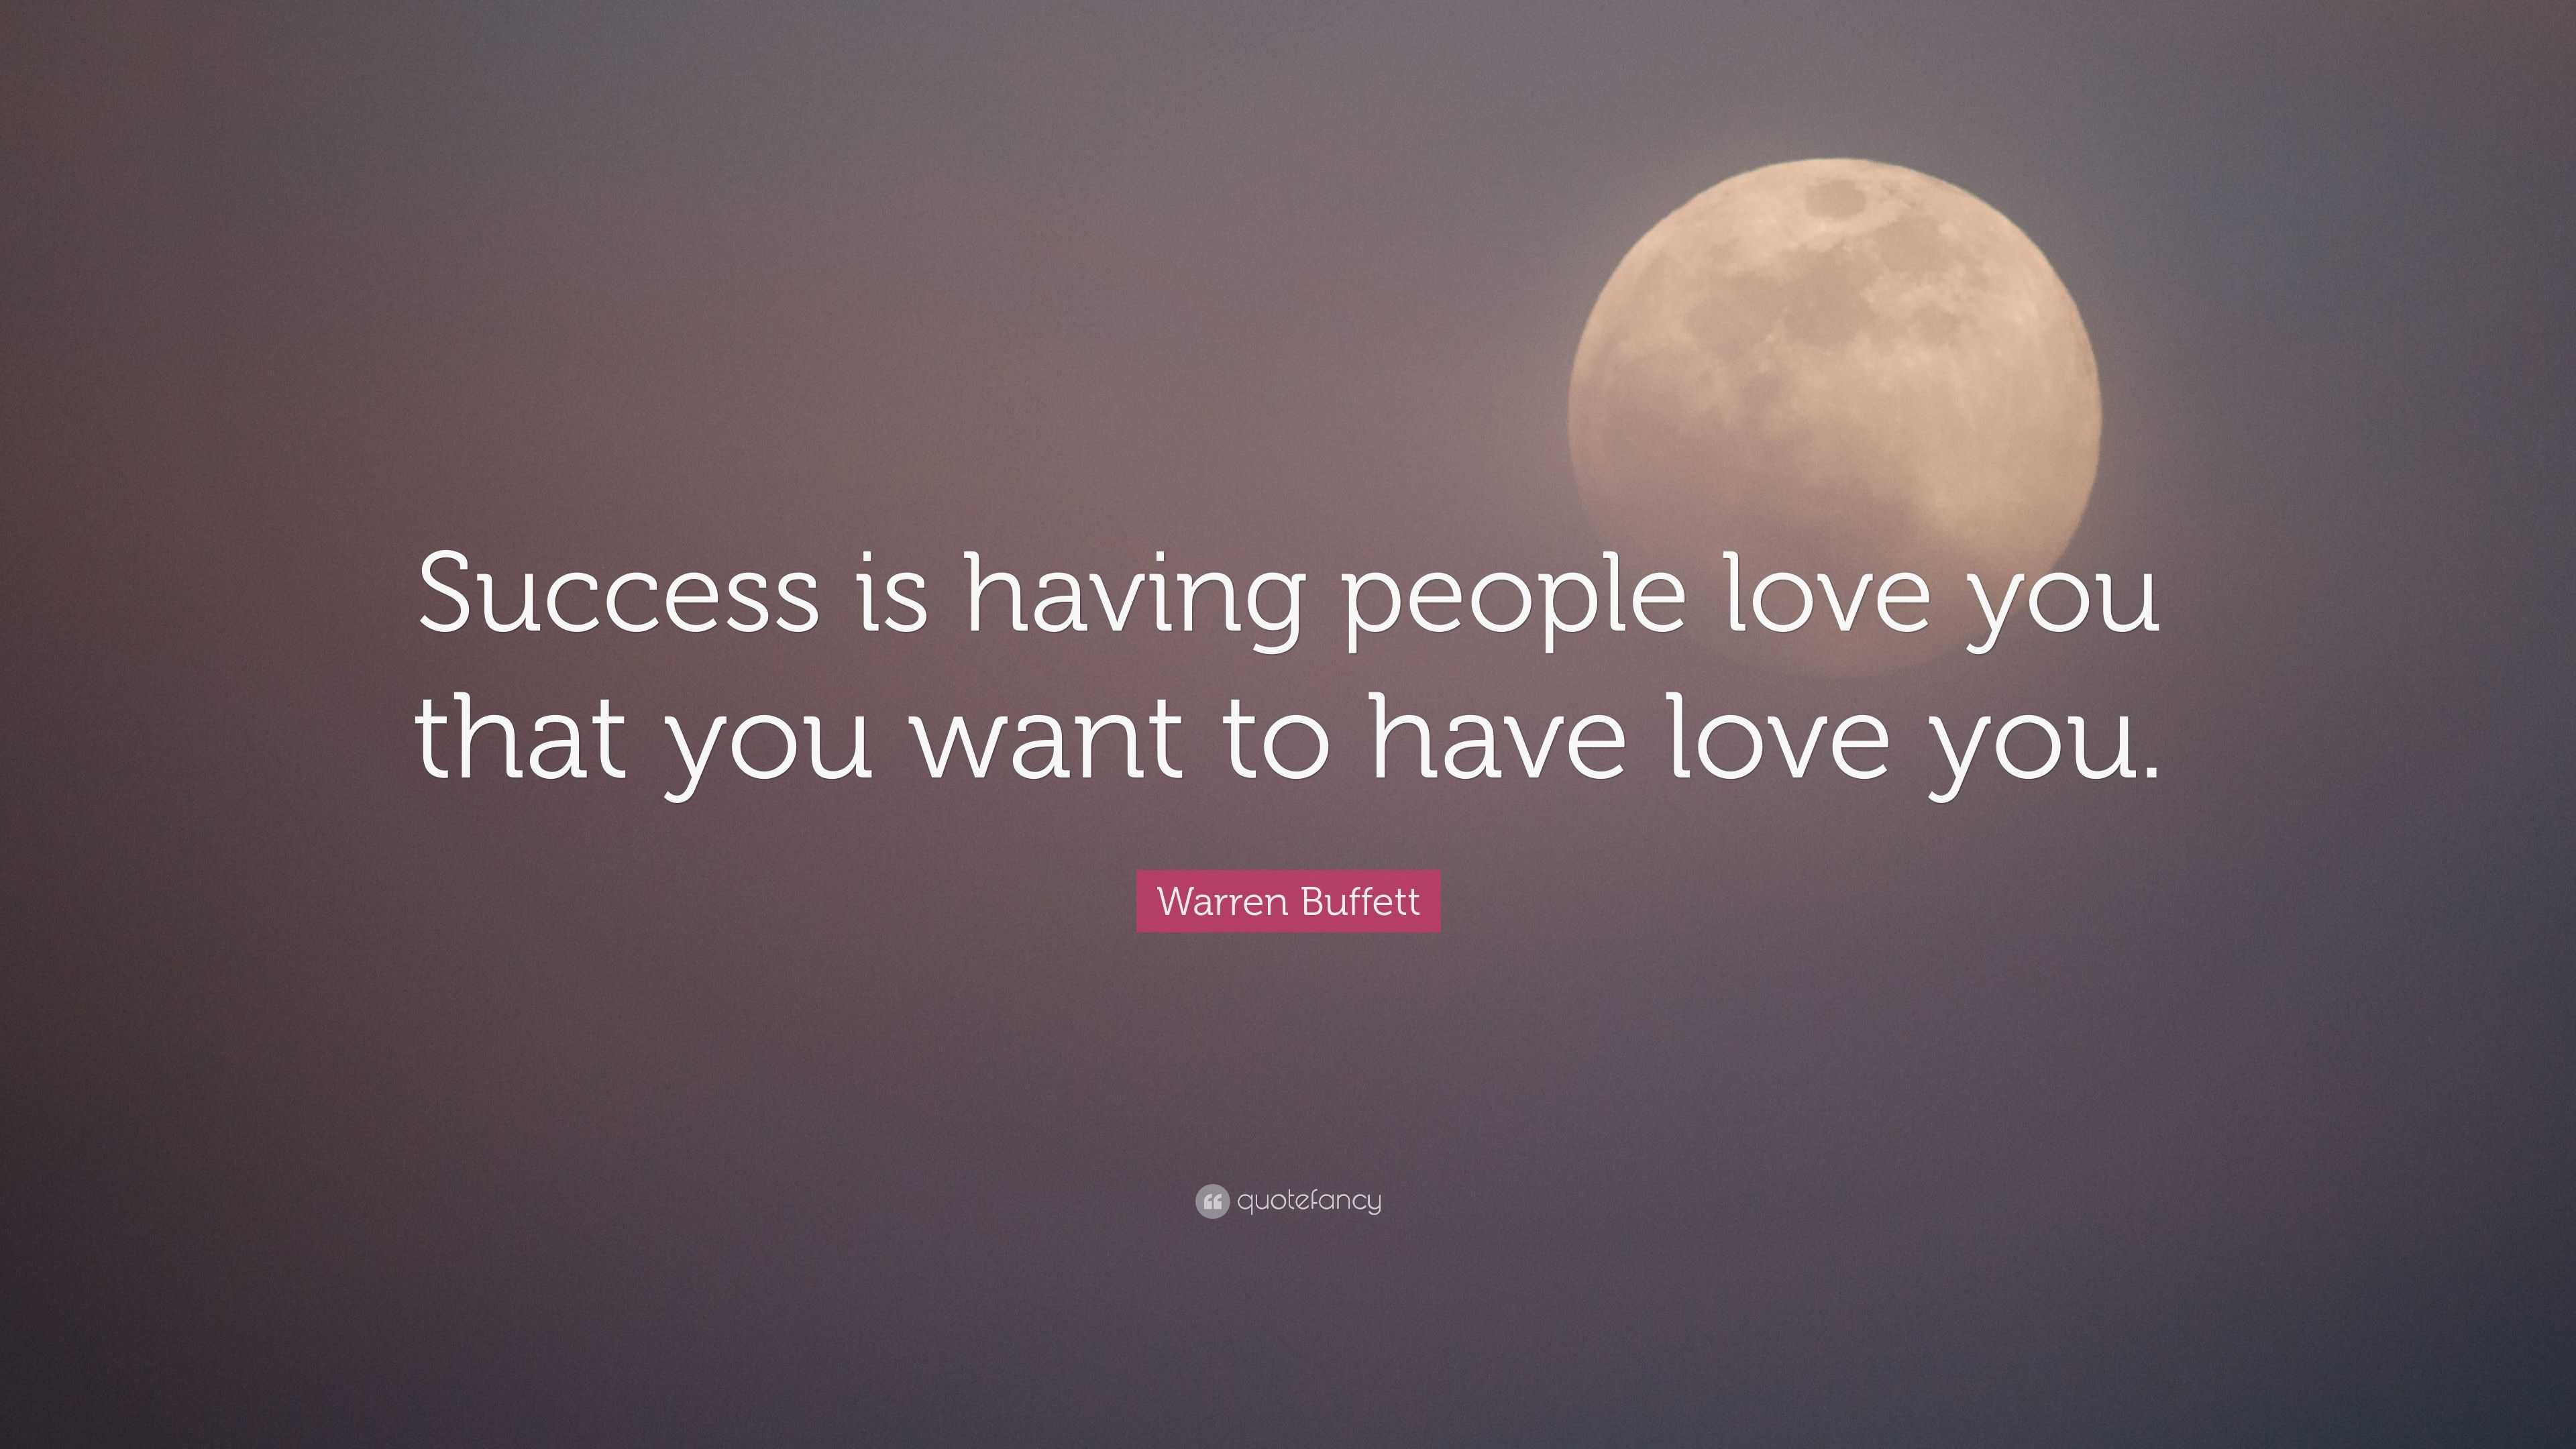 Warren Buffett Quote Success Is Having People Love You That You Want To Have Love You